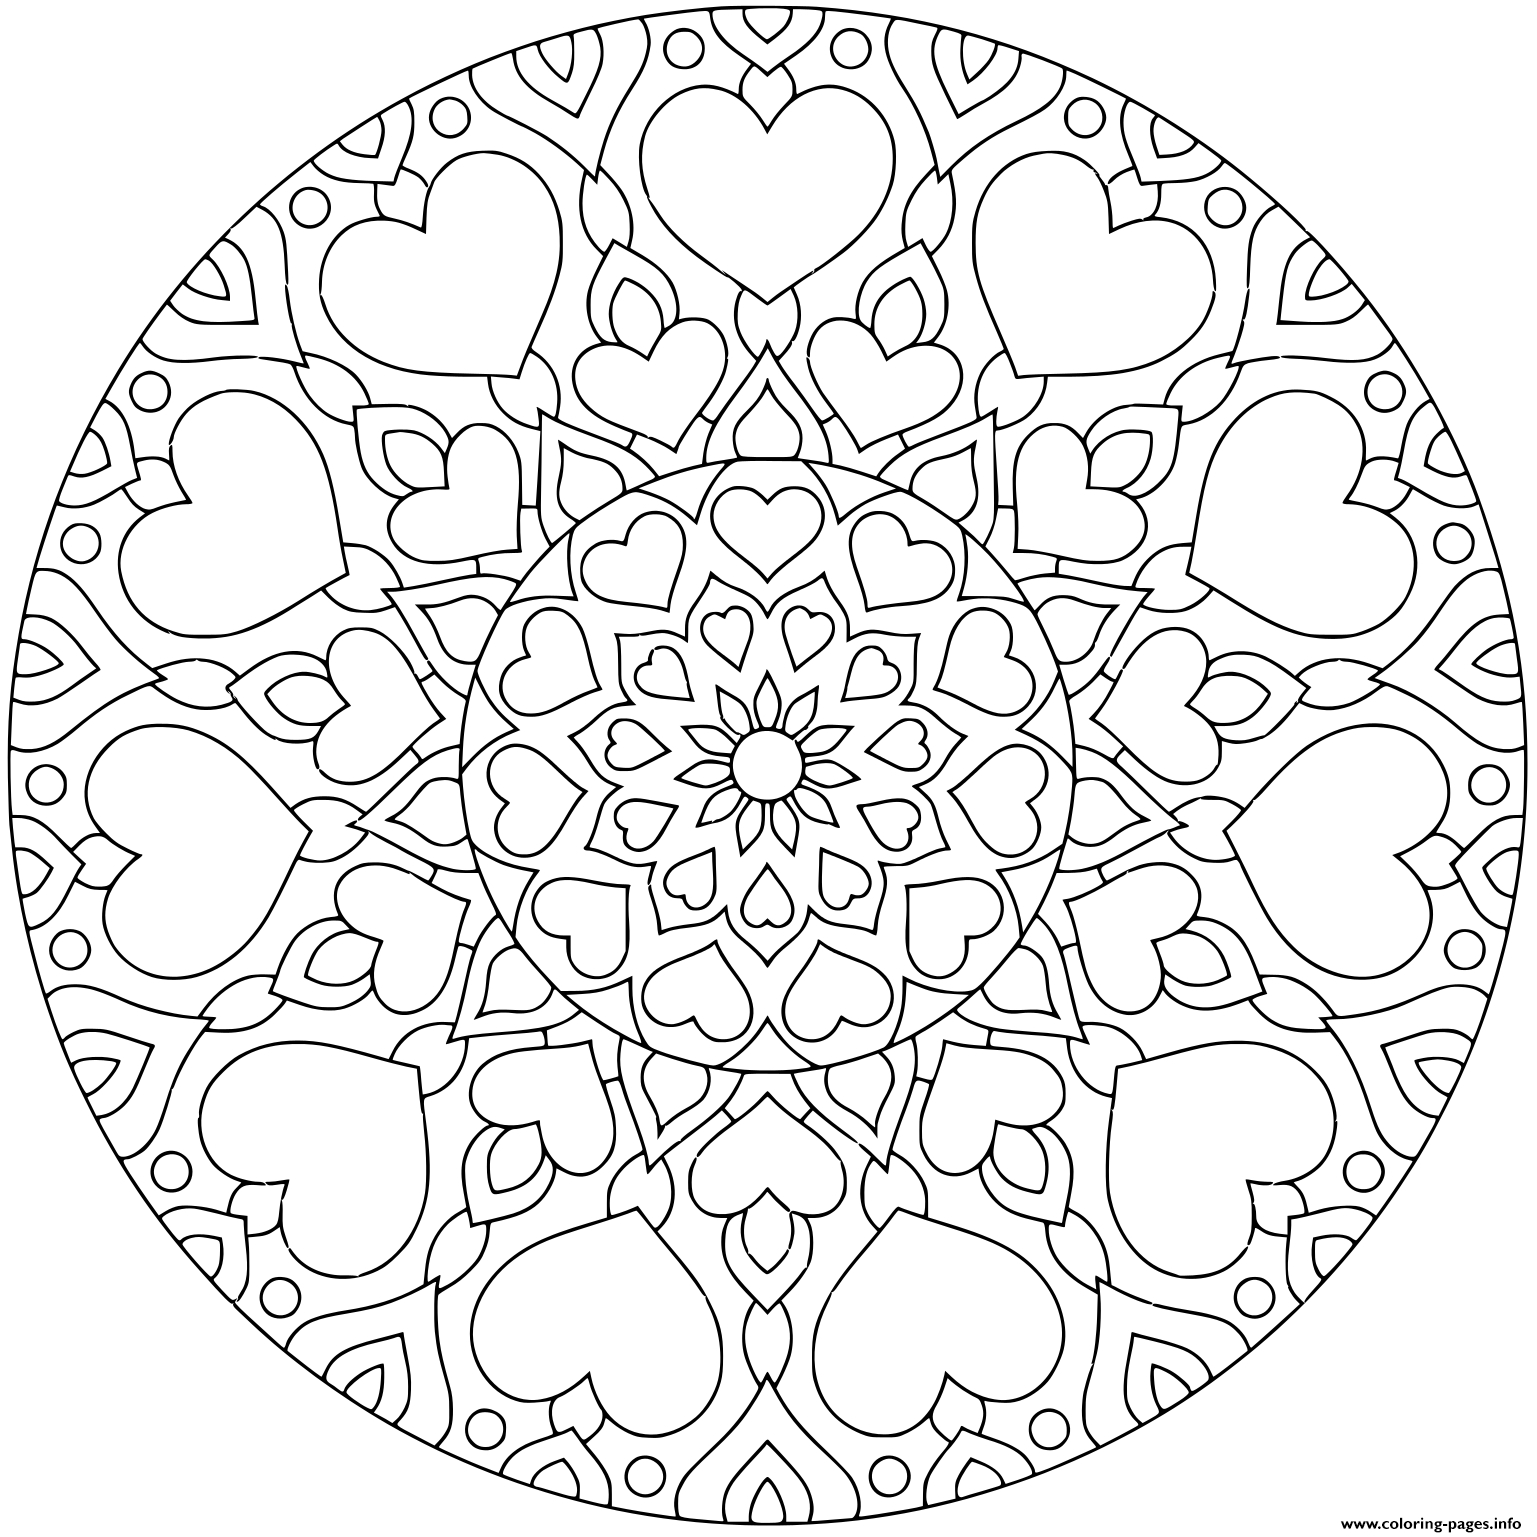 Flower Mandala With Hearts For Valentine S Day Coloring Page Printable dedans Mandala Coeur Adulte